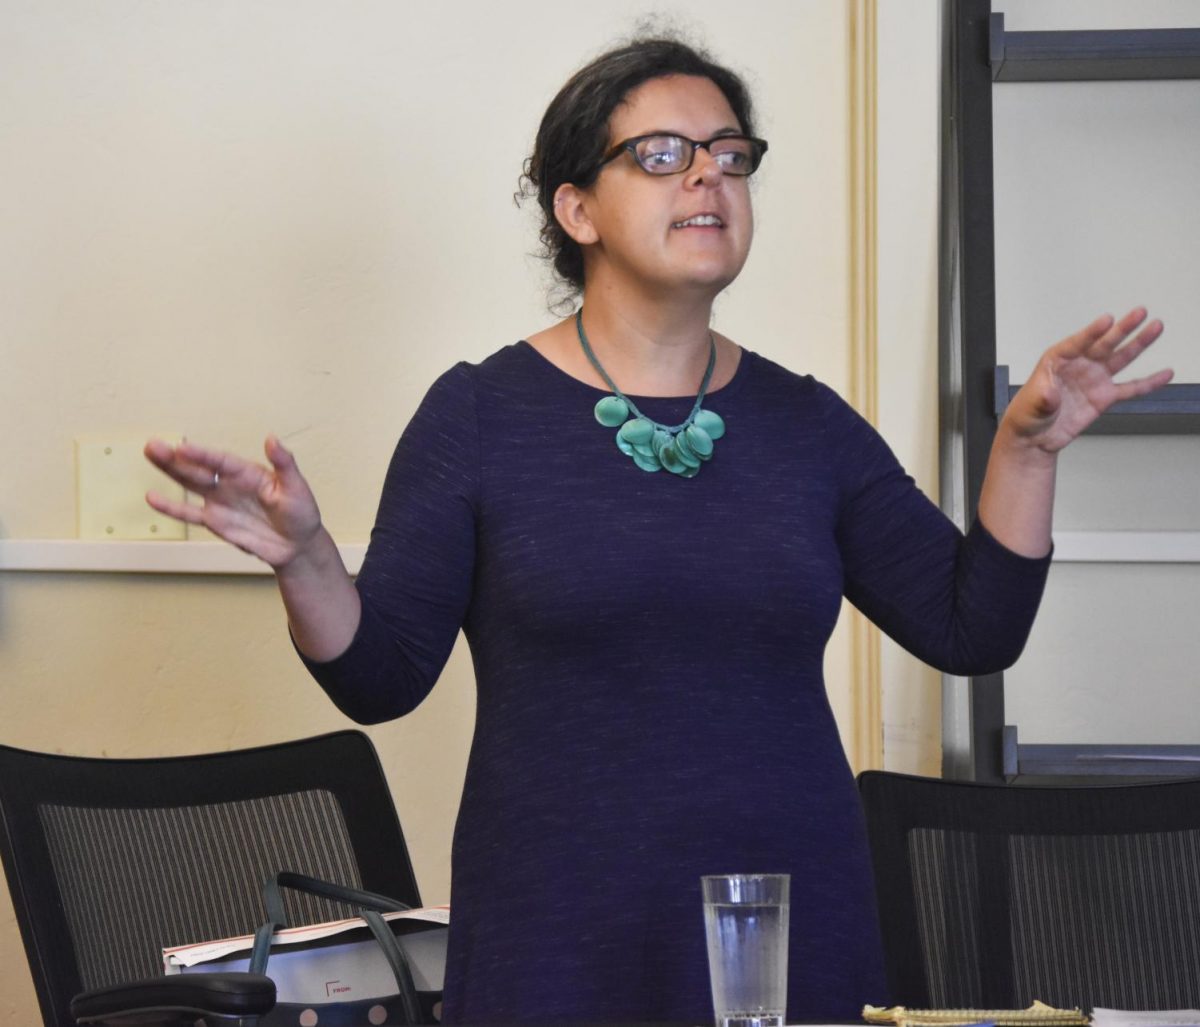 DACA Repeal Discussion

On September 15 during lunch in the Innovation Lab, San Jose-based 
immigration lawyer and NDB alumna Jessica Jenkins, ‘99, lead an 
information session on the repeal of DACA and a discussion of what the NDB community can do in response.